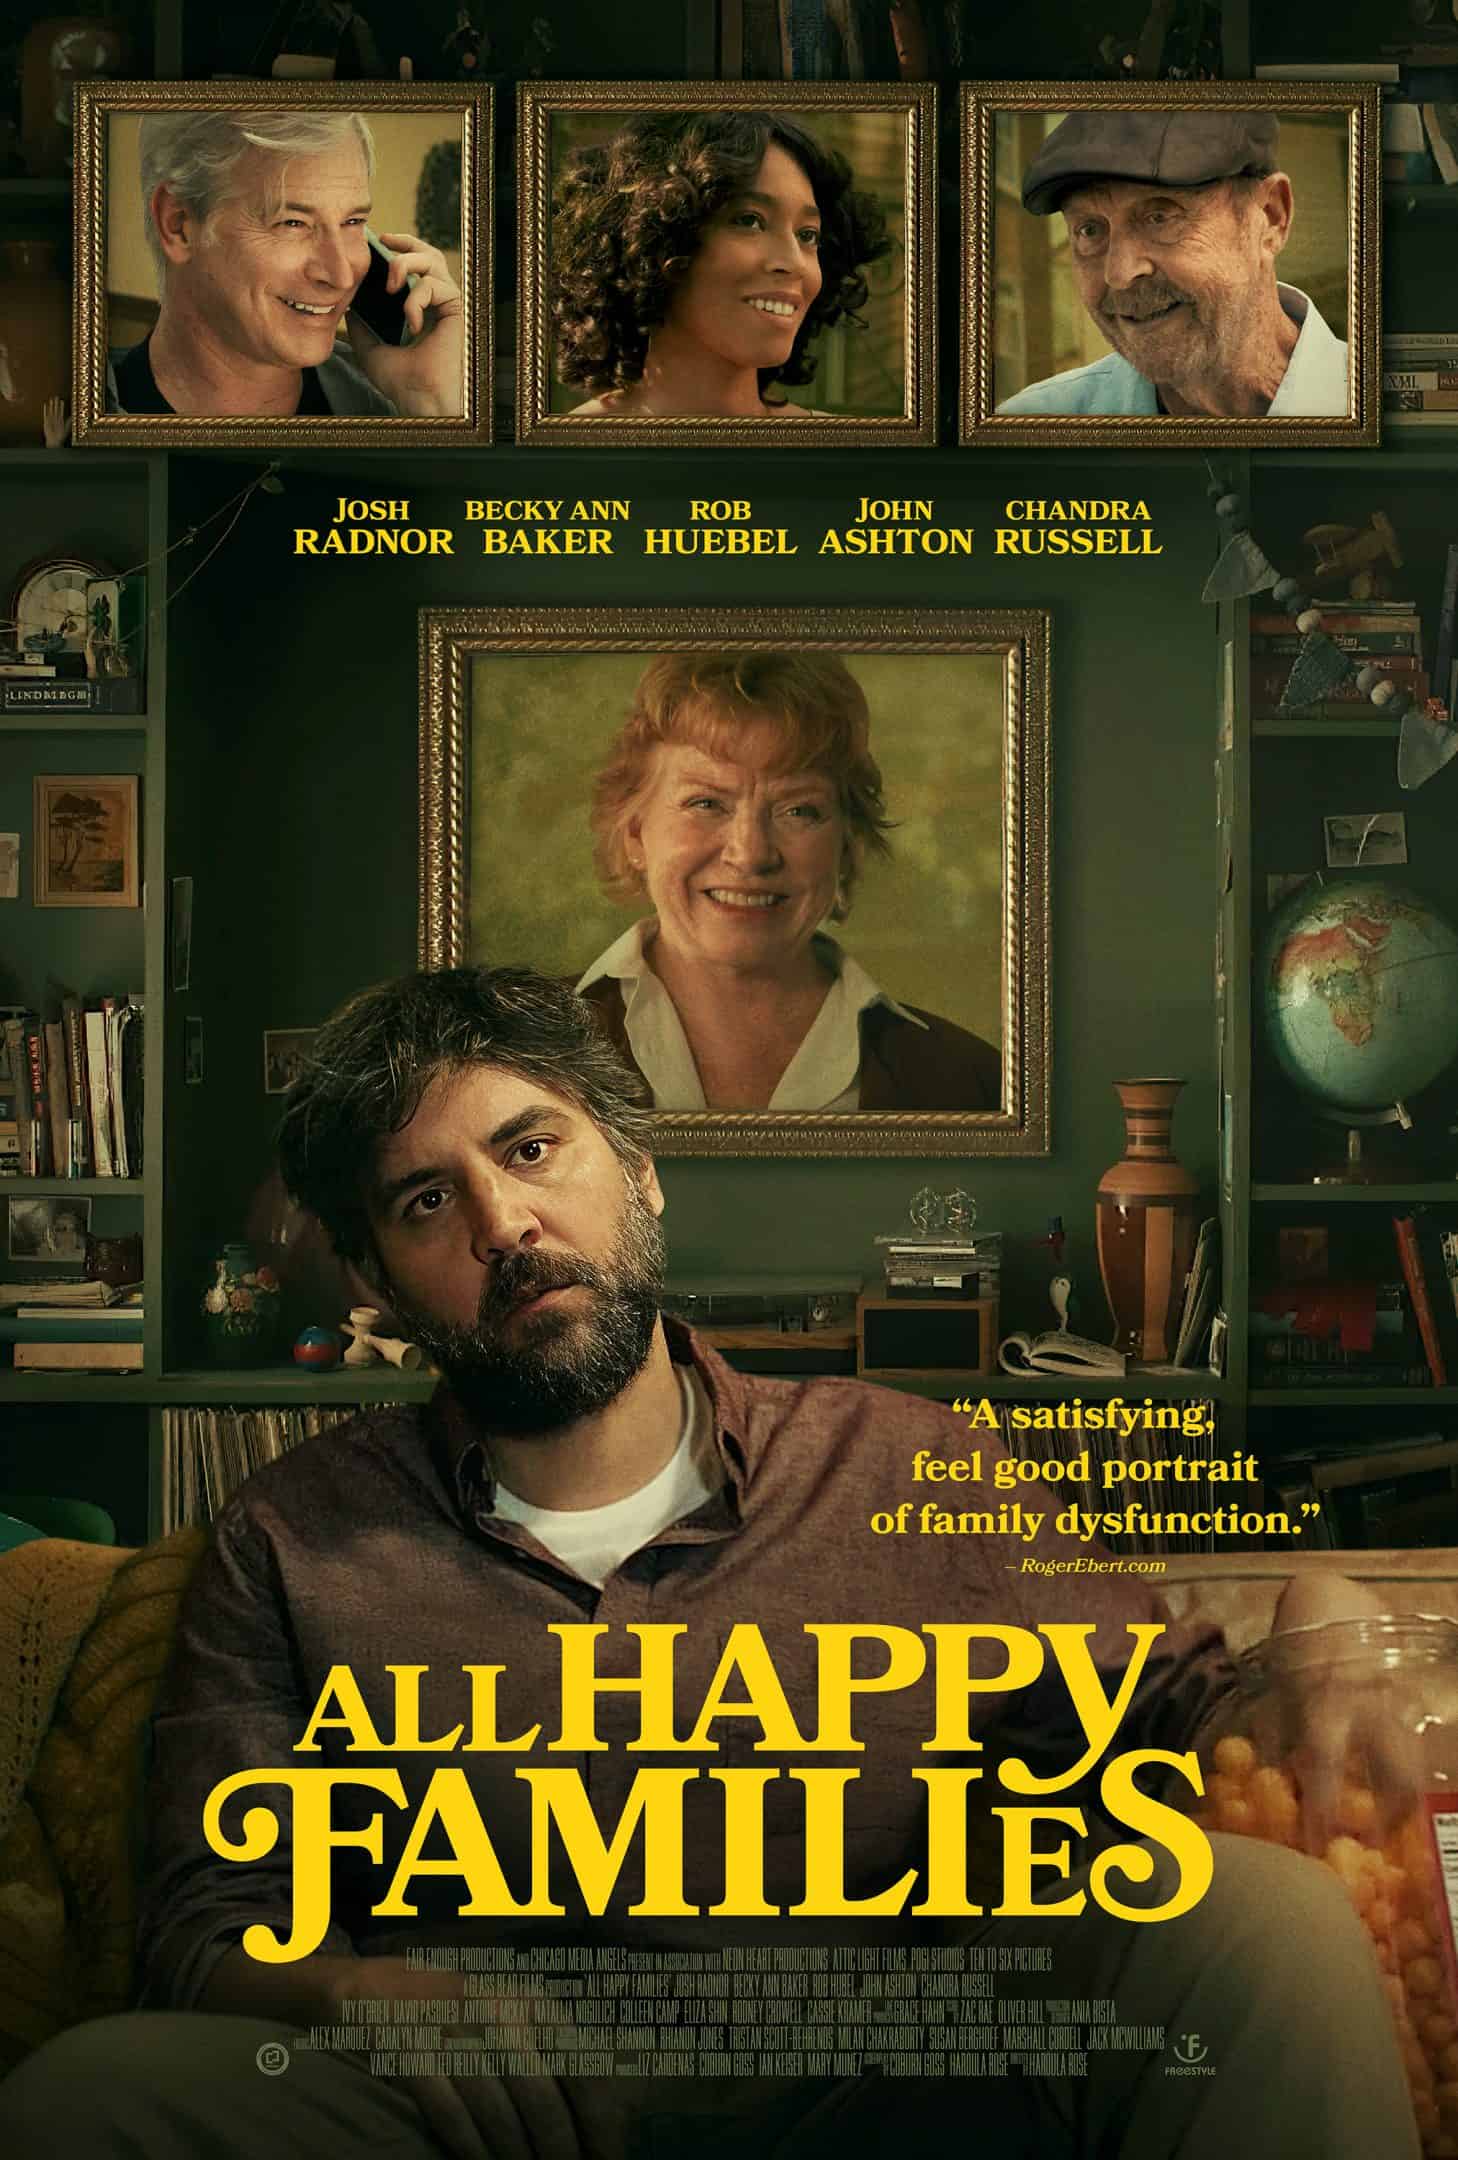 Freestyle Digital Media Acquires North American Rights to “All Happy Families” 1